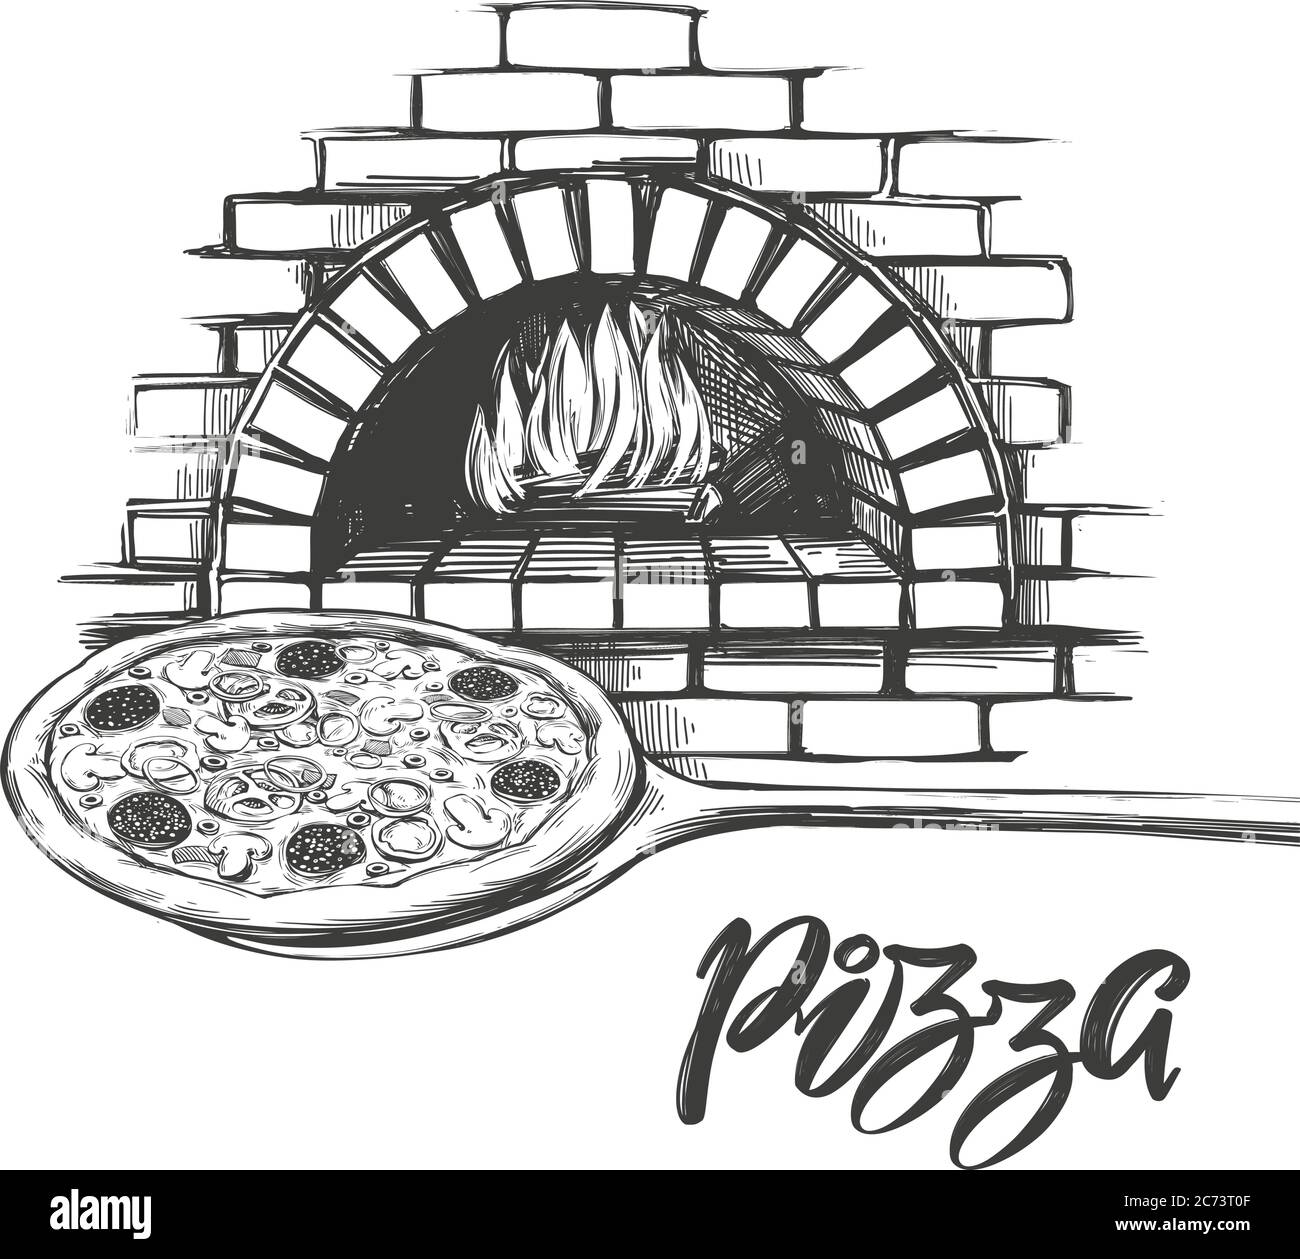 Italian pizza ,process of cooking pizza, baking with fire, logo, hand drawn vector illustration realistic sketch. Stock Vector